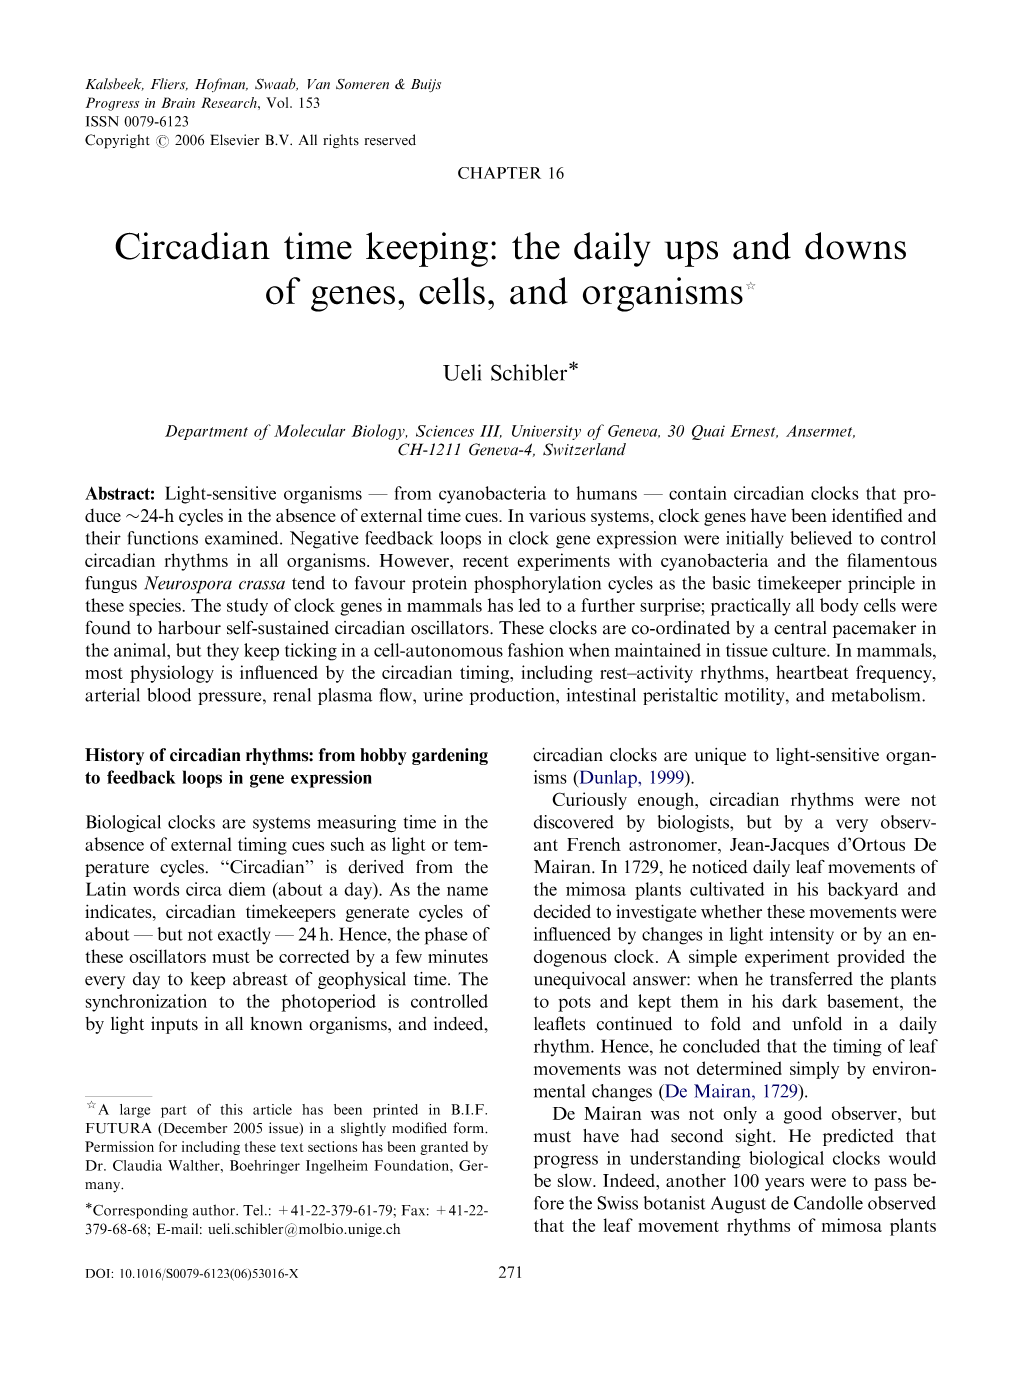 Circadian Time Keeping: the Daily Ups and Downs of Genes, Cells, and Organisms$